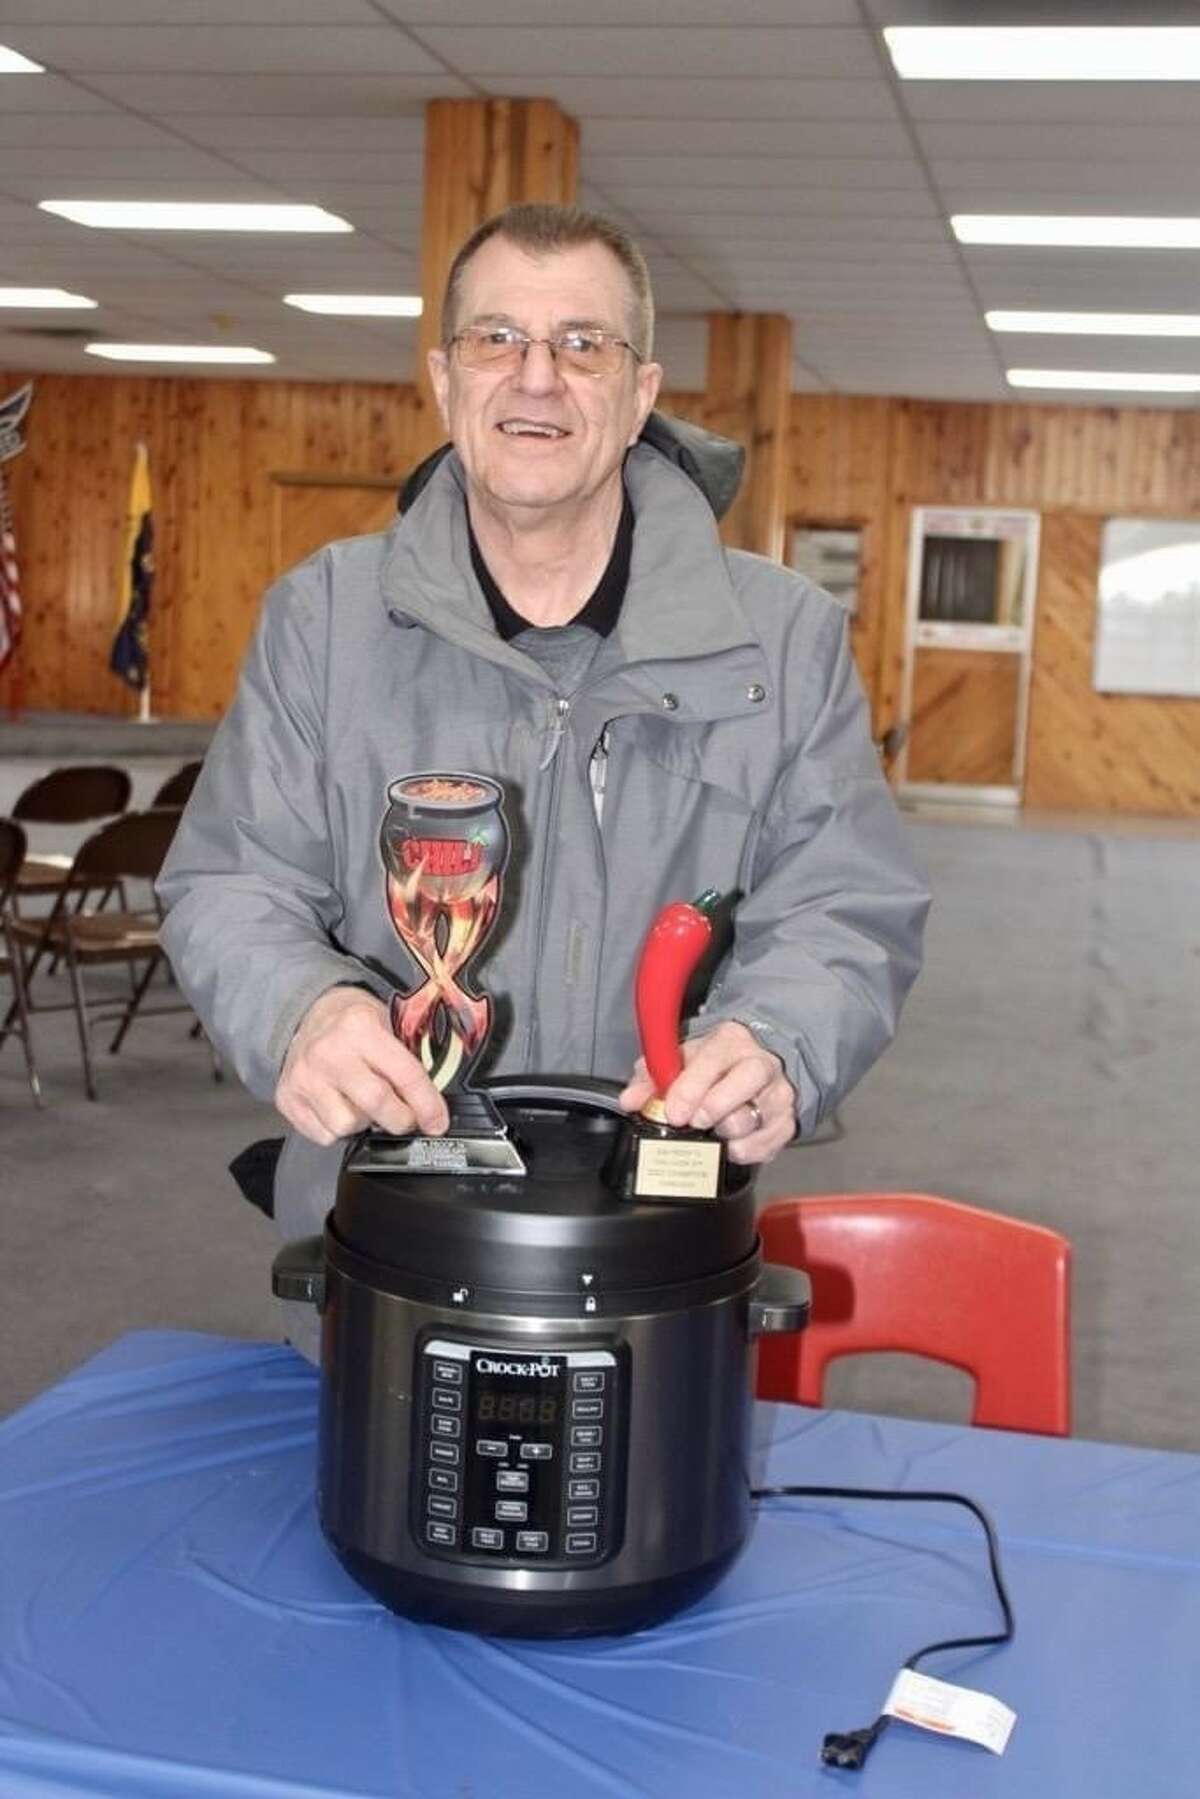 Gary Bailey took the honors for "Best Overall" chili and "Best Home cook" chili during the Reed City BSA chili cookoff this weekend.